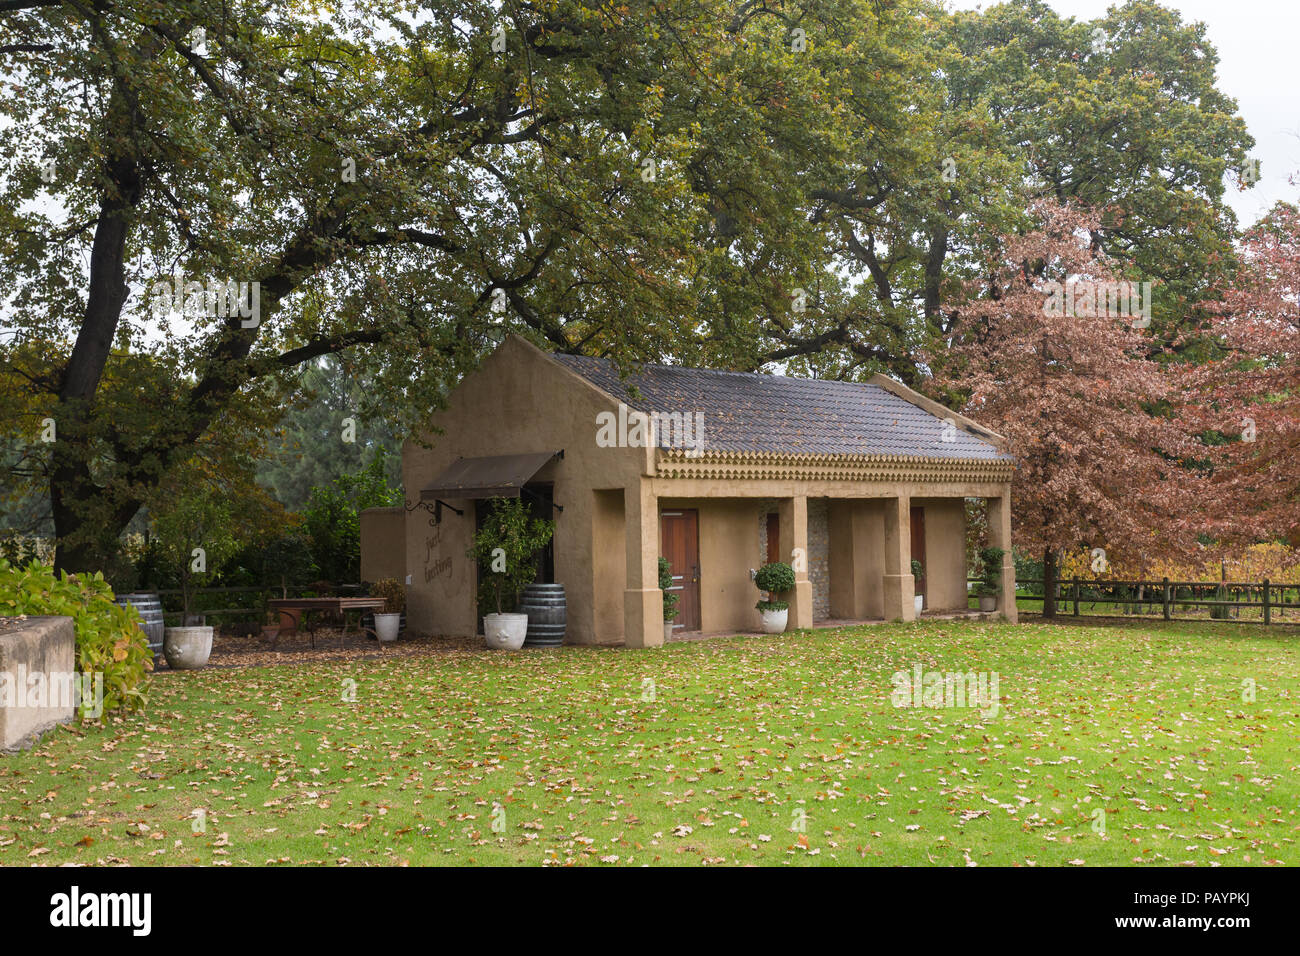 Autumn or Fall landscape scene of small cottage or building used as wine tasting centre set in large garden with trees as background and decor items Stock Photo